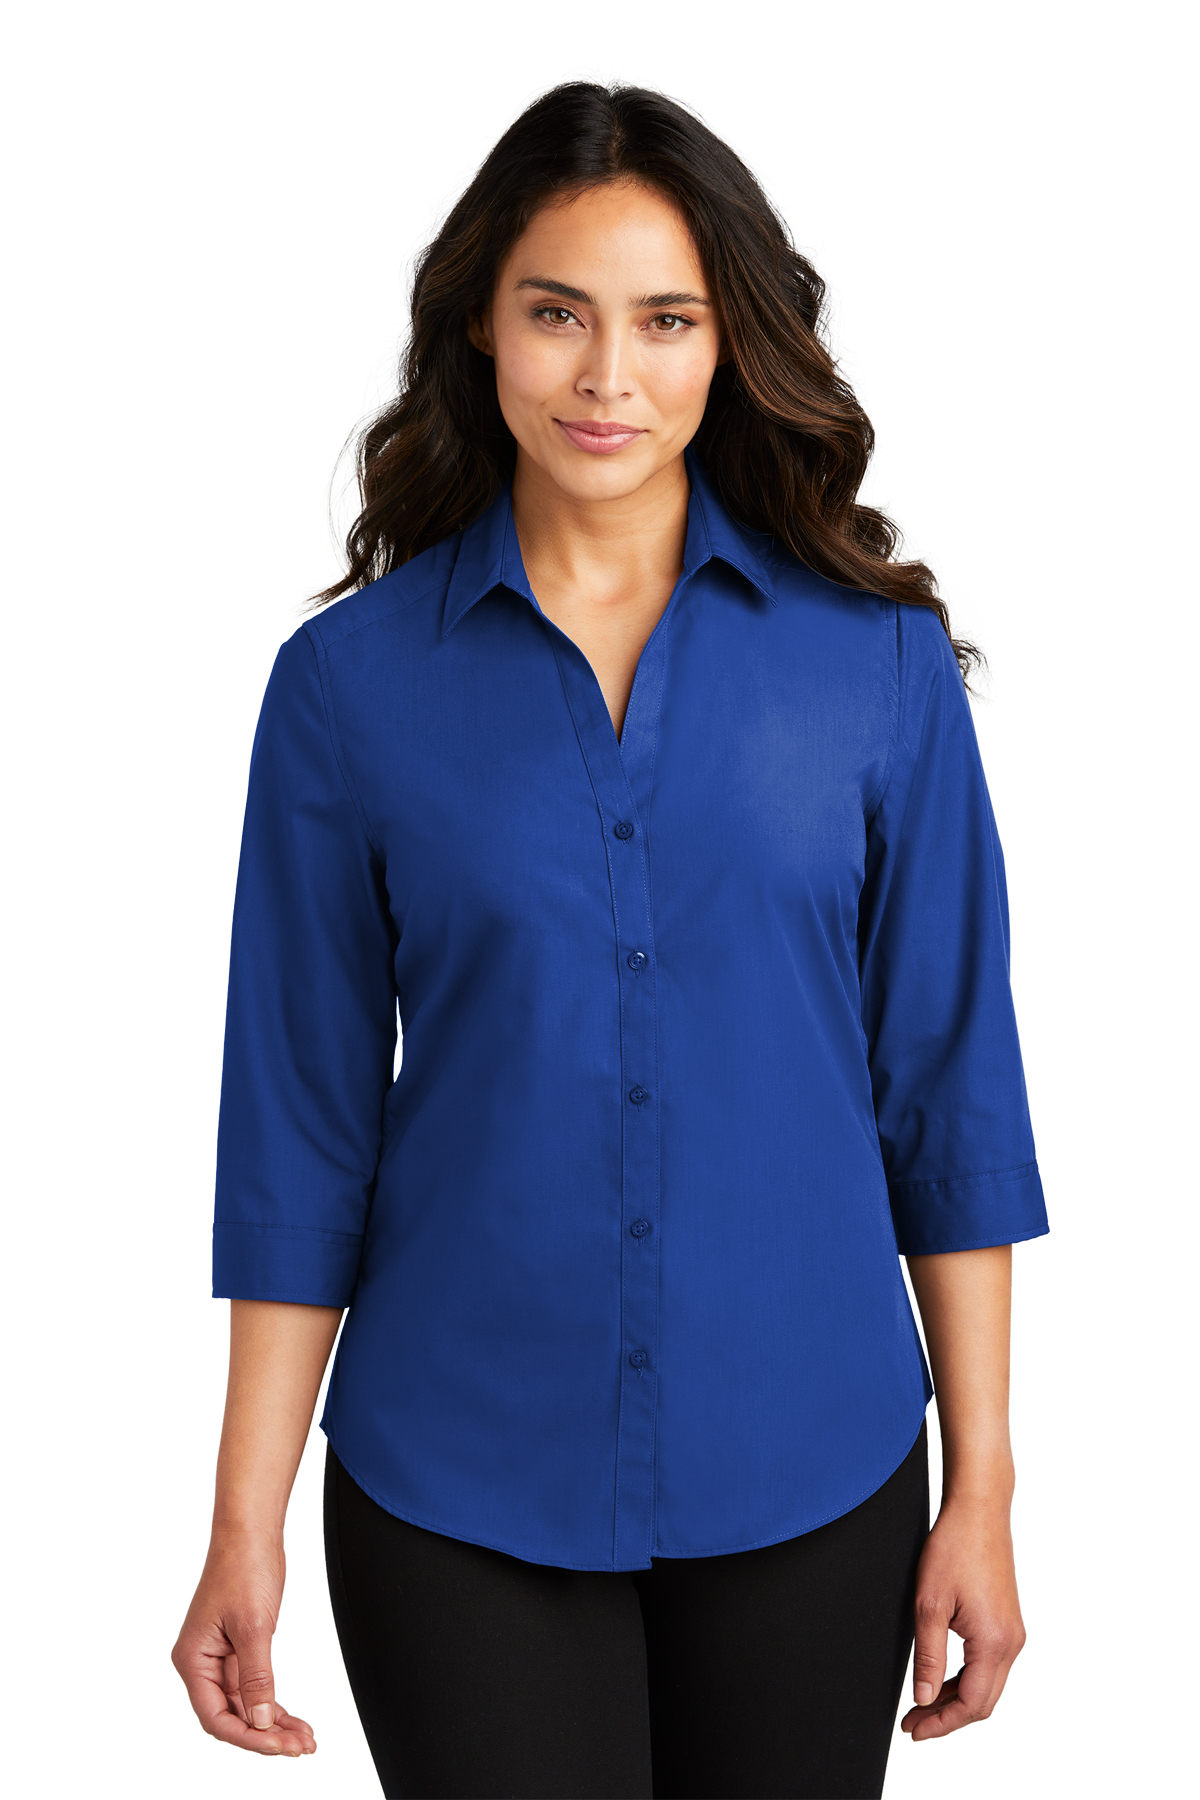 Women's Shirt by Olive and Oak Size M. Blue in Color RN 120941